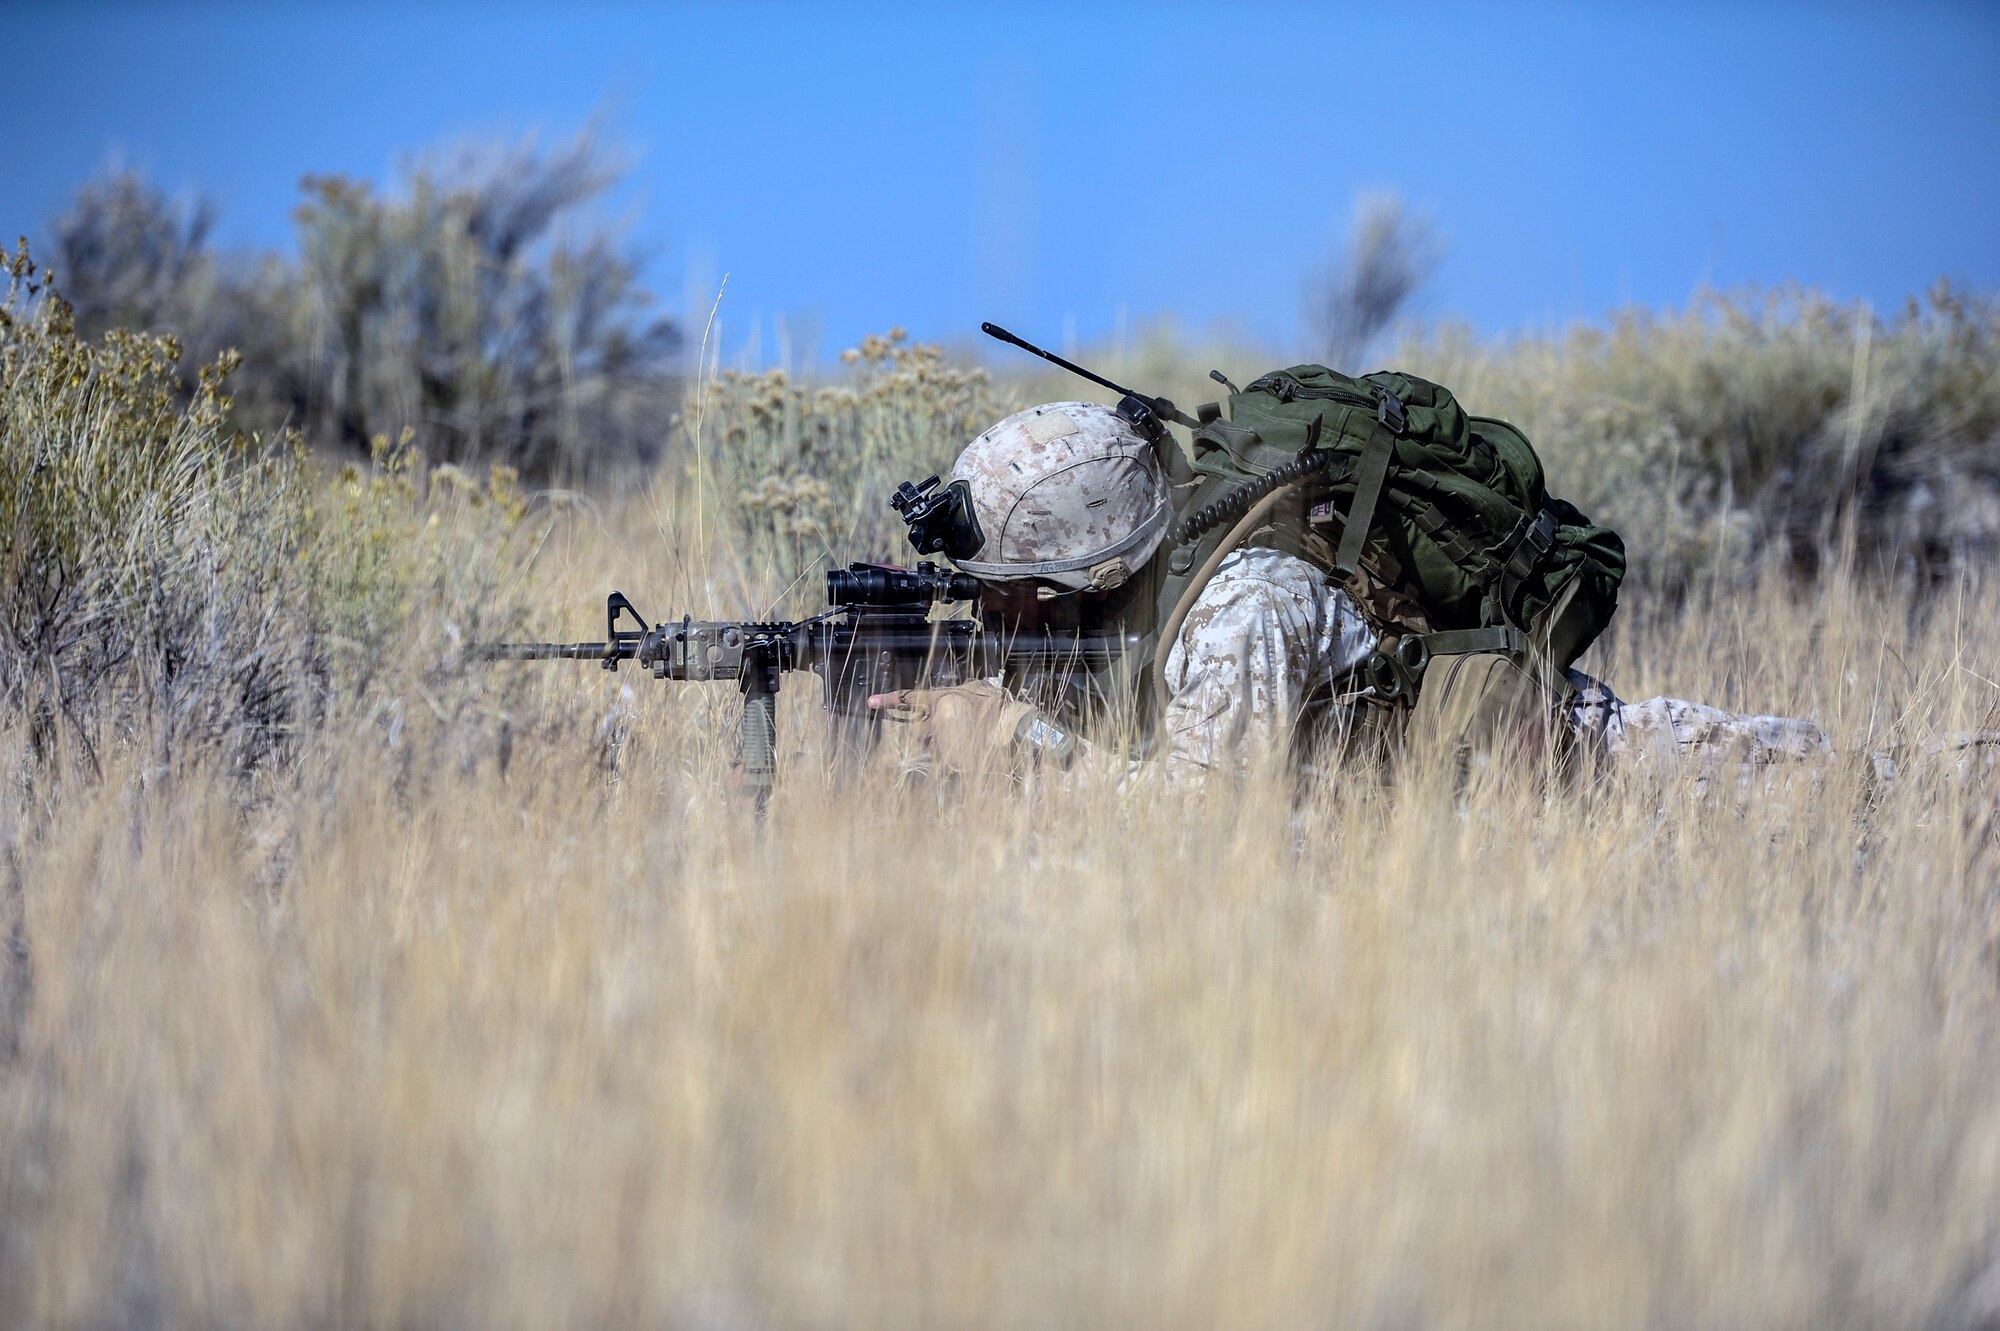 A U.S. Marine from the 1st Air Naval Gunfire Liaison Company Supporting Arms Liaison Team, who has been training in the Idaho desert since Sept. 30, 2013, lays prone scanning for enemy activity at a Juniper Butte Bombing Range mock village near Mountain Home Air Force Base, Idaho, Oct. 9, 2013. The SALT assaulted the village and seized weapons of mass destruction during exercise Mountain Roundup 2013. (U.S. Air Force photo by Master Sgt. Kevin Wallace/RELEASED)